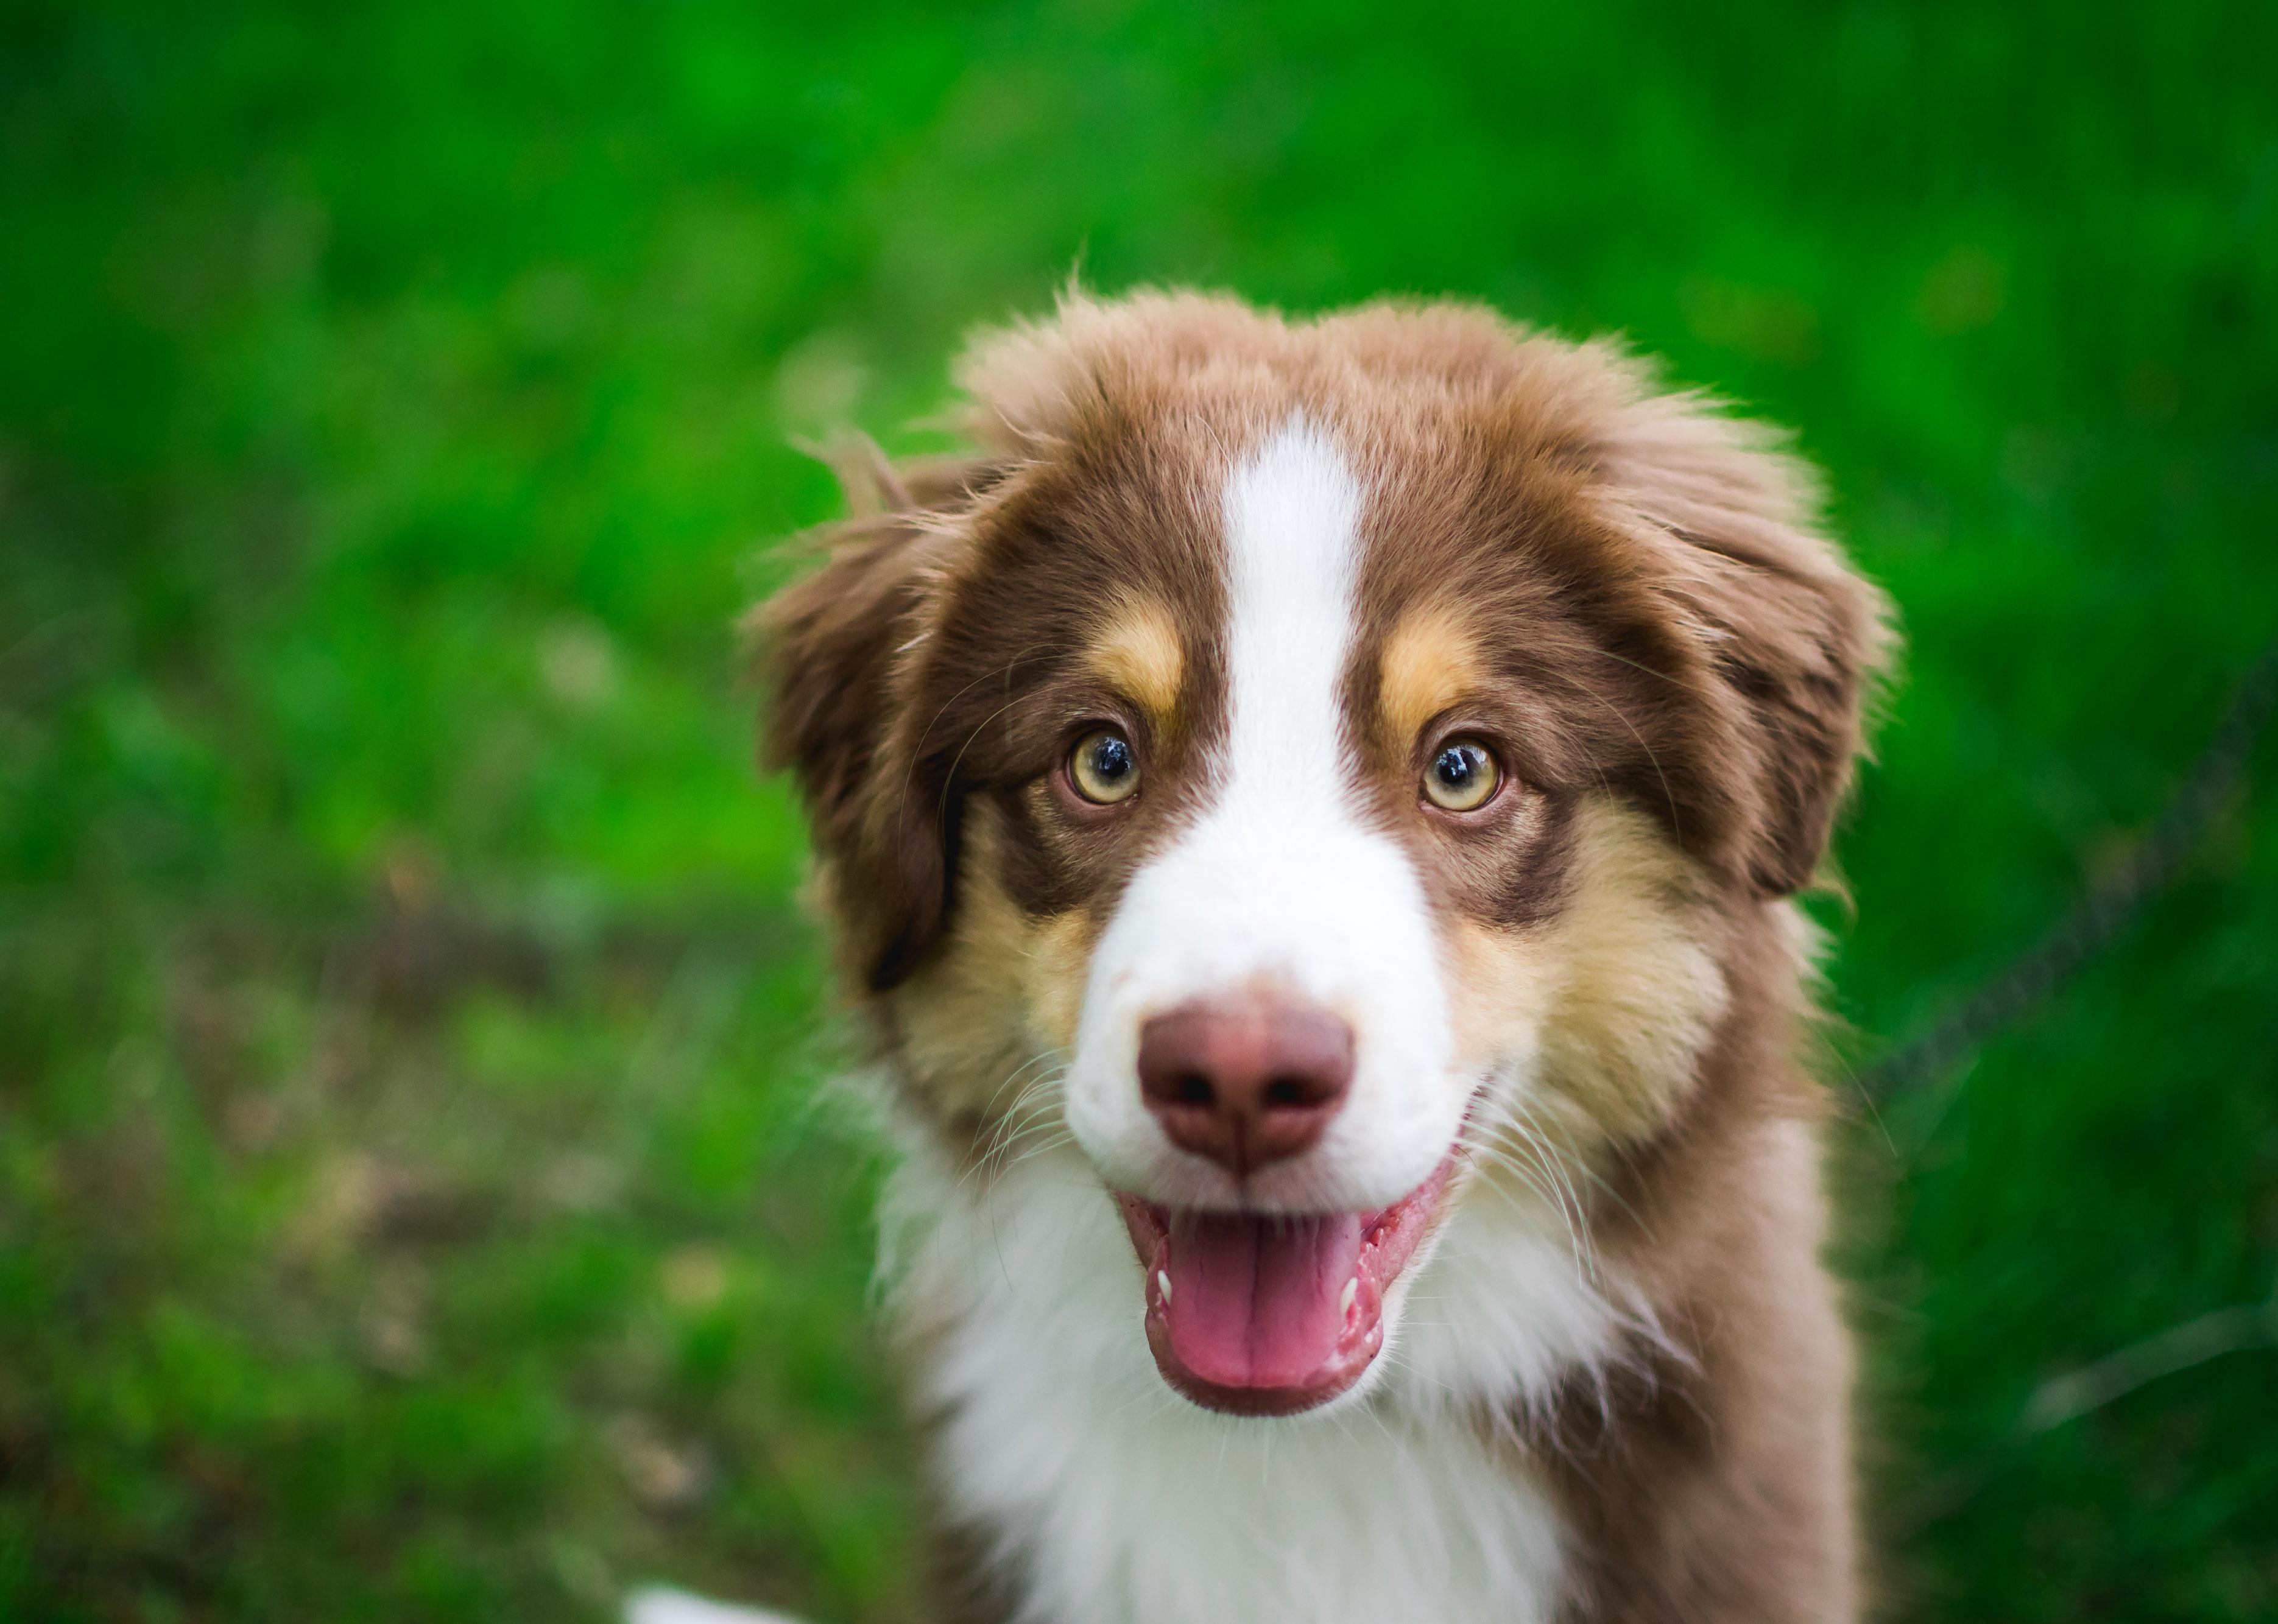 A brown and white Miniature American Shepherd looking into the camera with grass background.